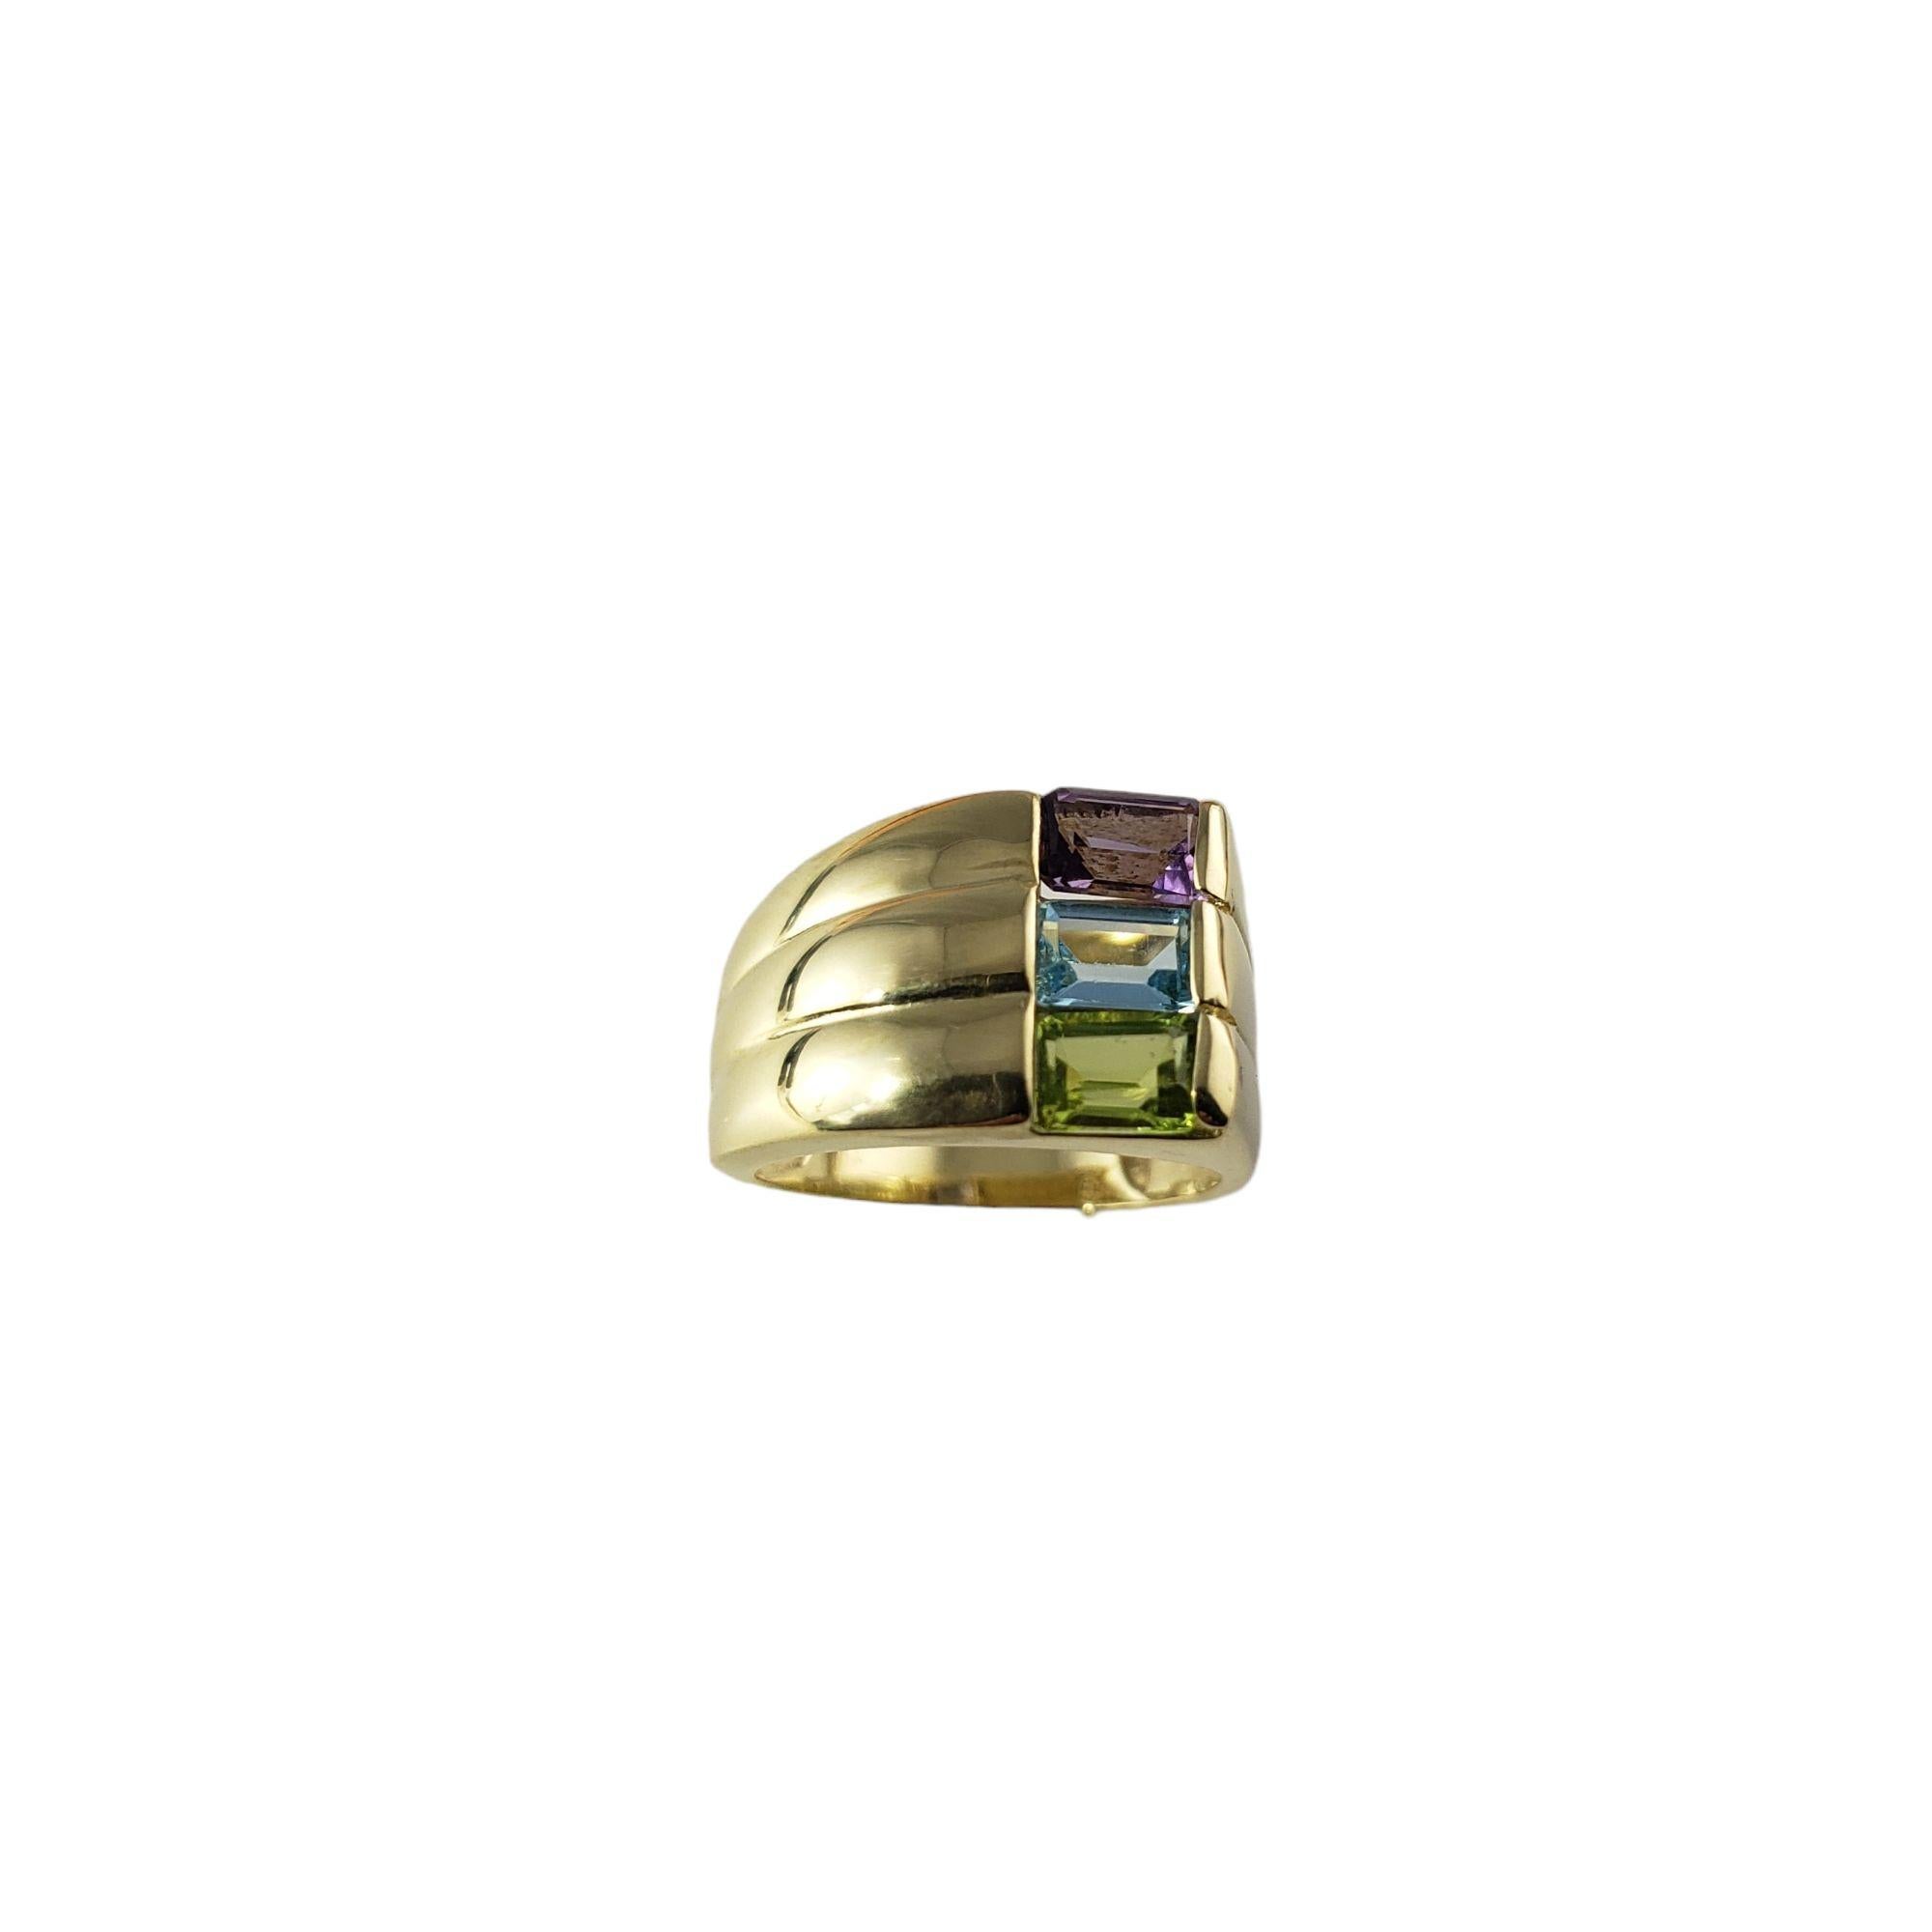 Vintage 14 Karat Yellow Gold Peridot, Amethyst and Topaz Ring Size 6.25-

This elegant ring features one amethyst , one peridot and one blue topaz set in beautifully detailed 14K yellow gold.  Width: 13 mm.

Shank: 3 mm.

Size:  6.25

Weight:  6.5